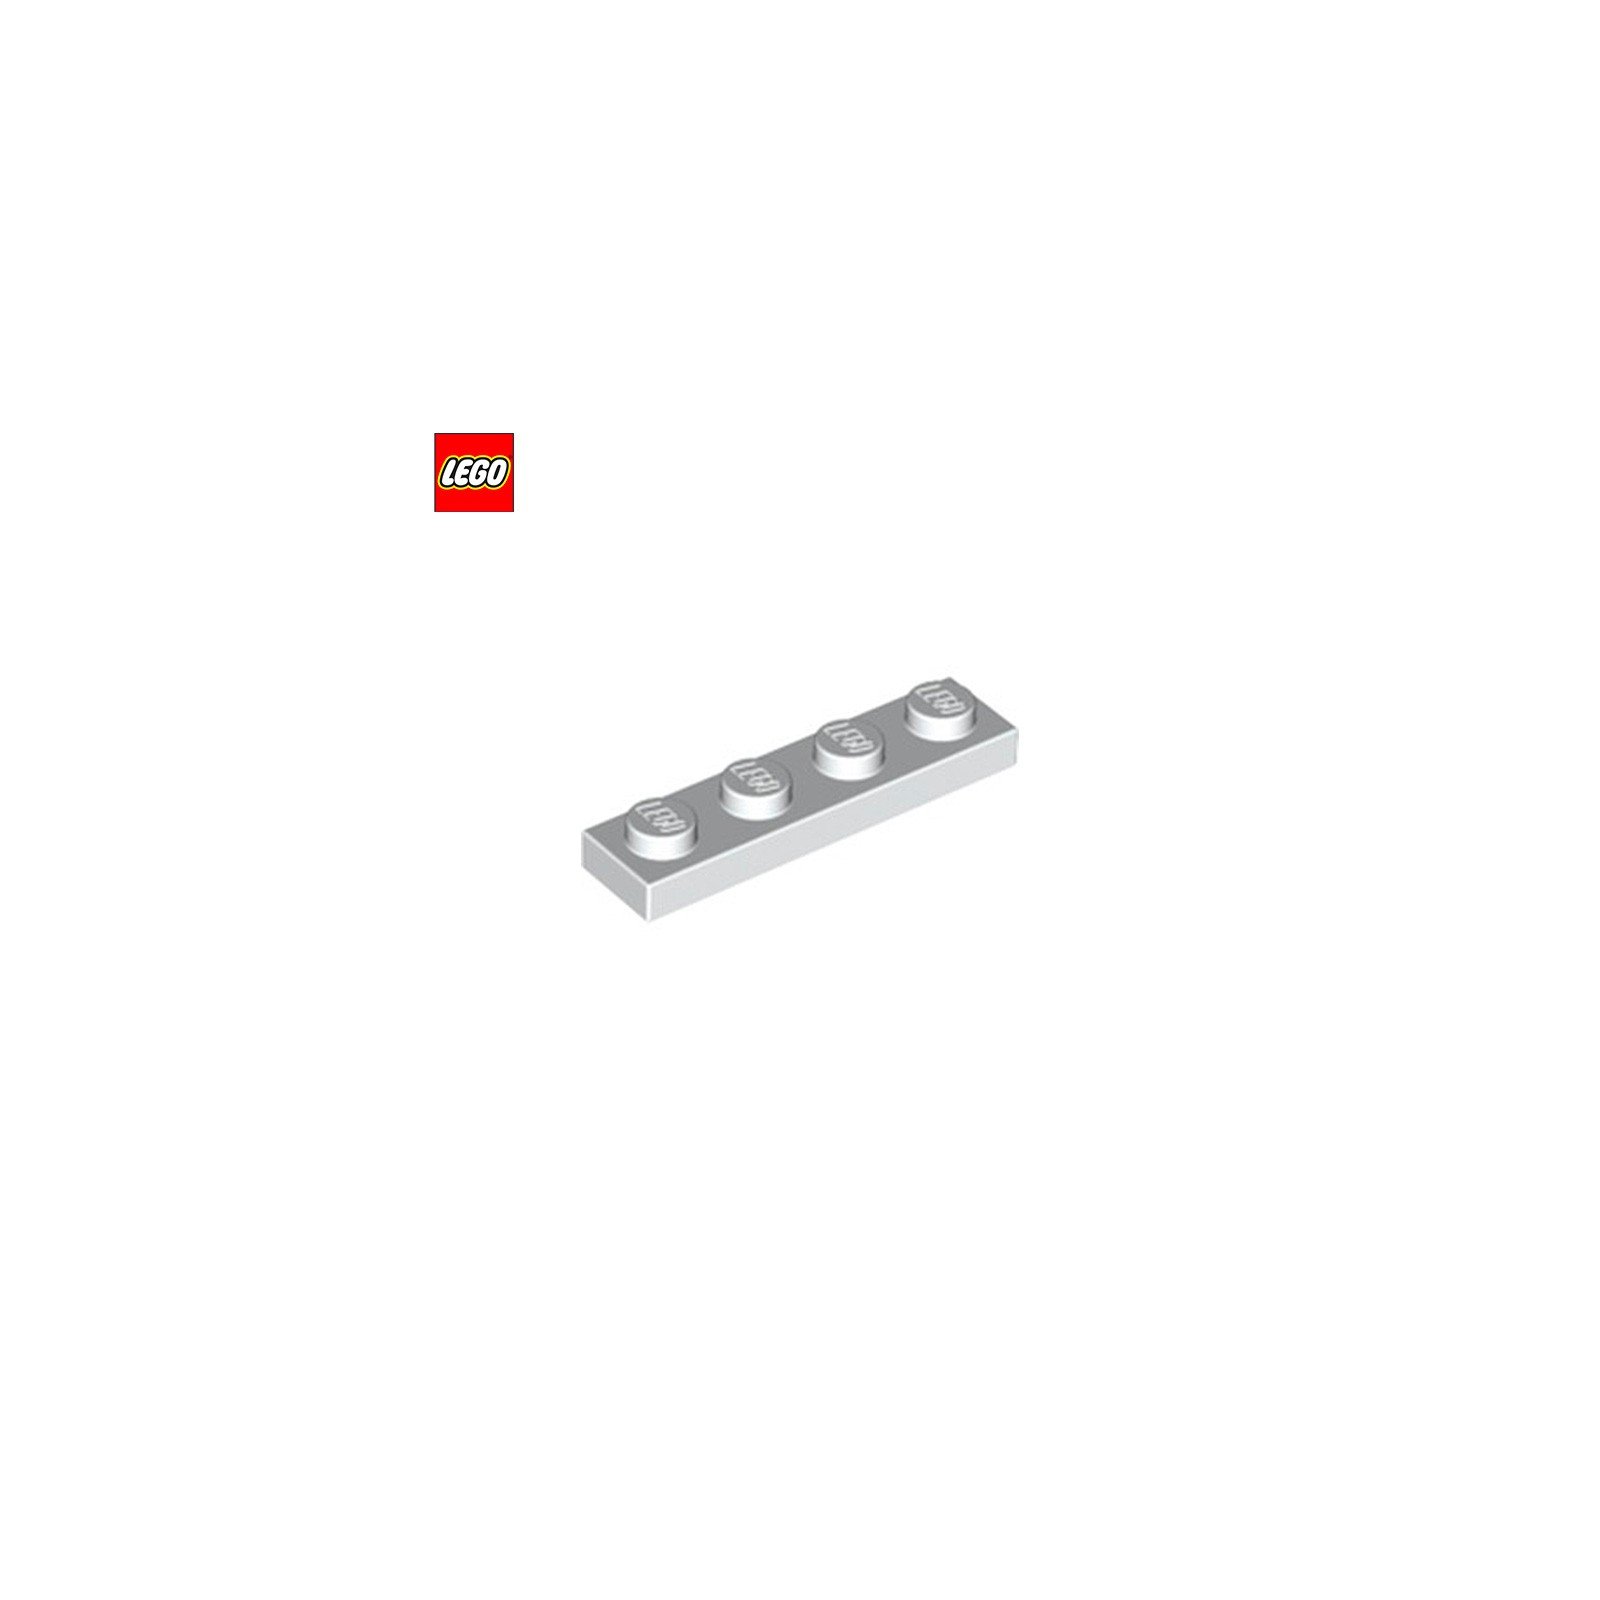 Plate 1x4 - LEGO® Part 3710